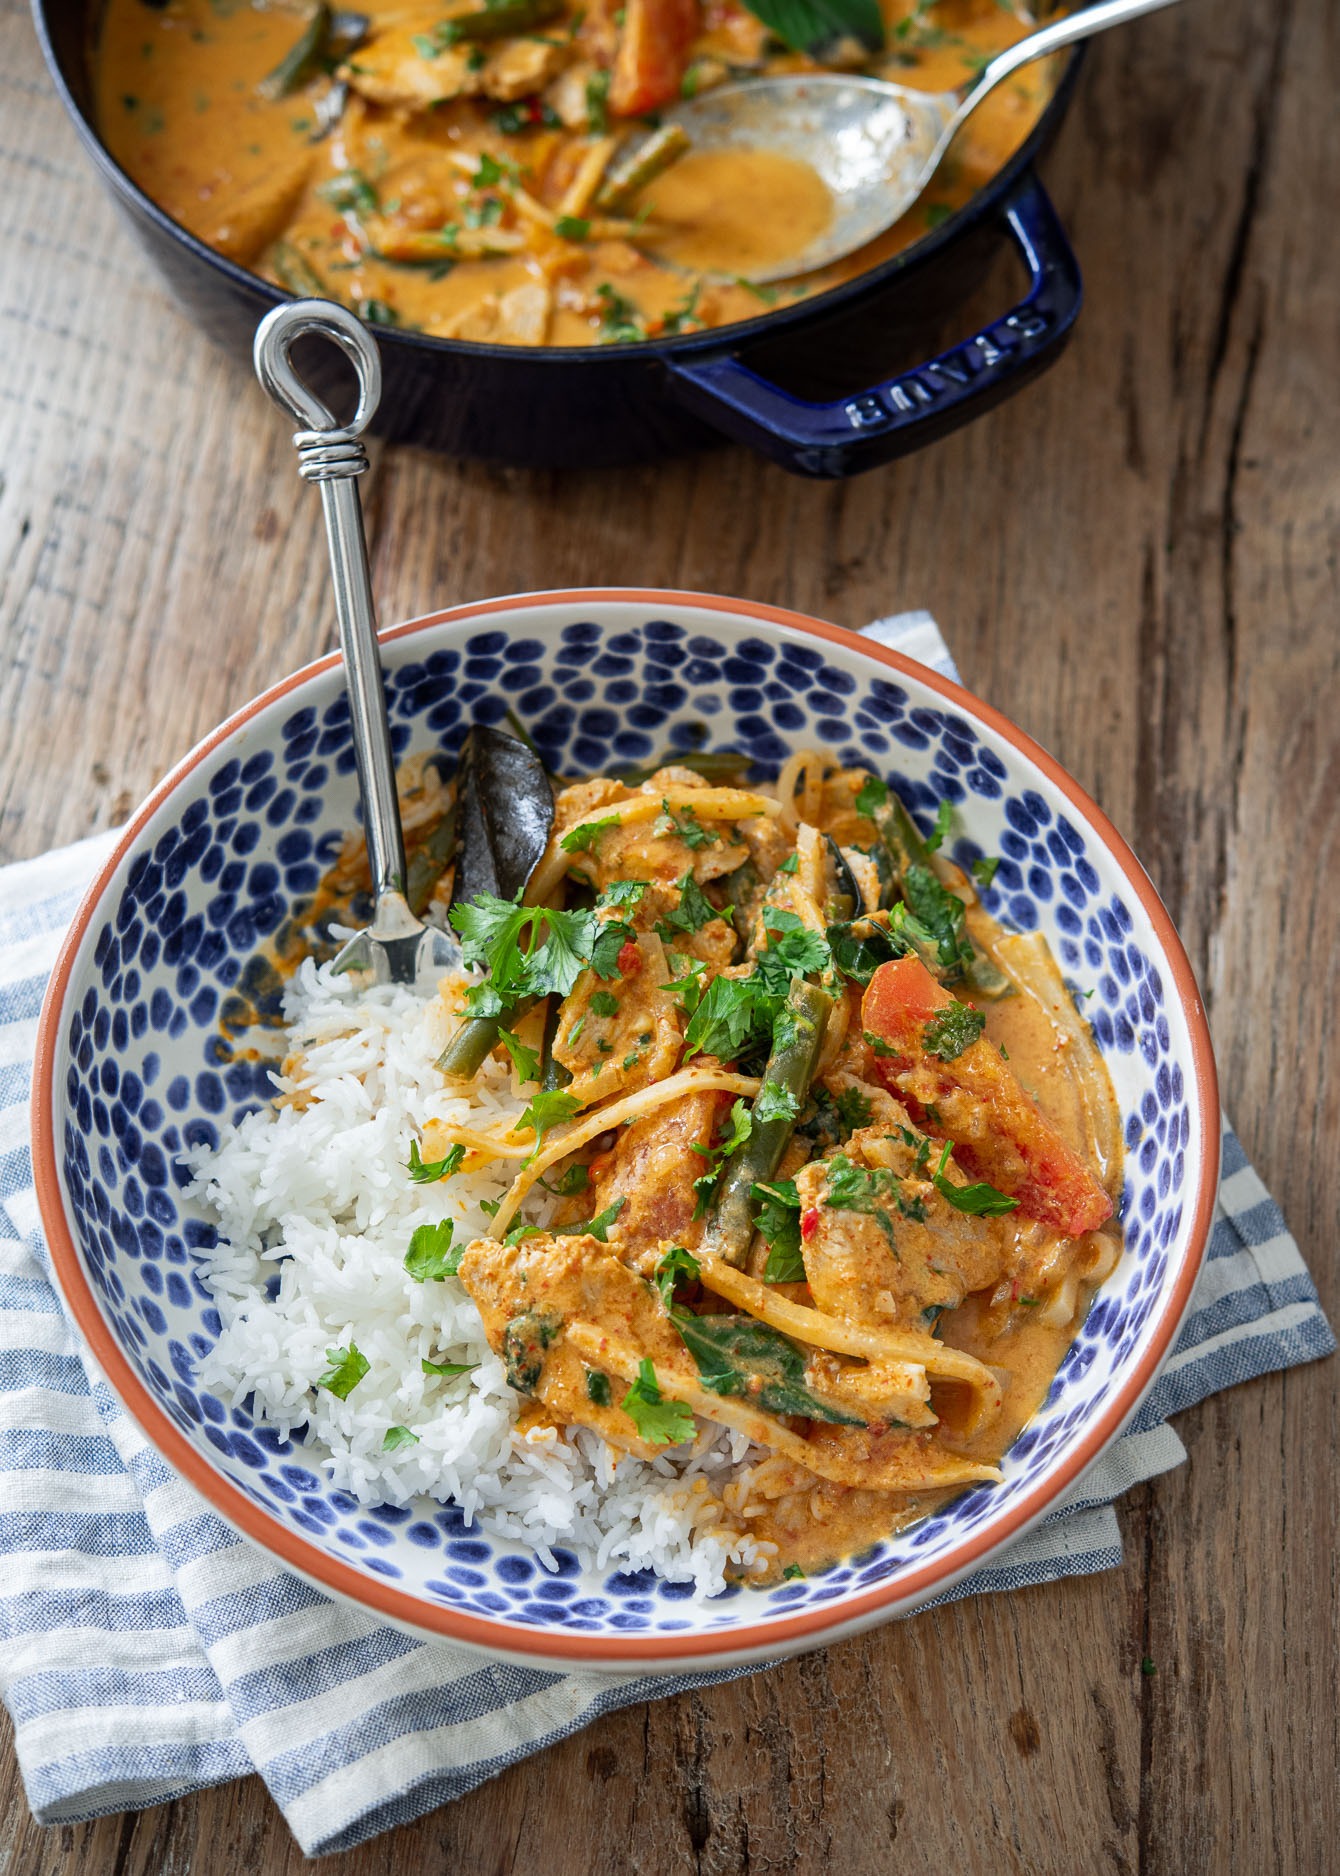 Thai red curry chicken and vegetables served over rice.